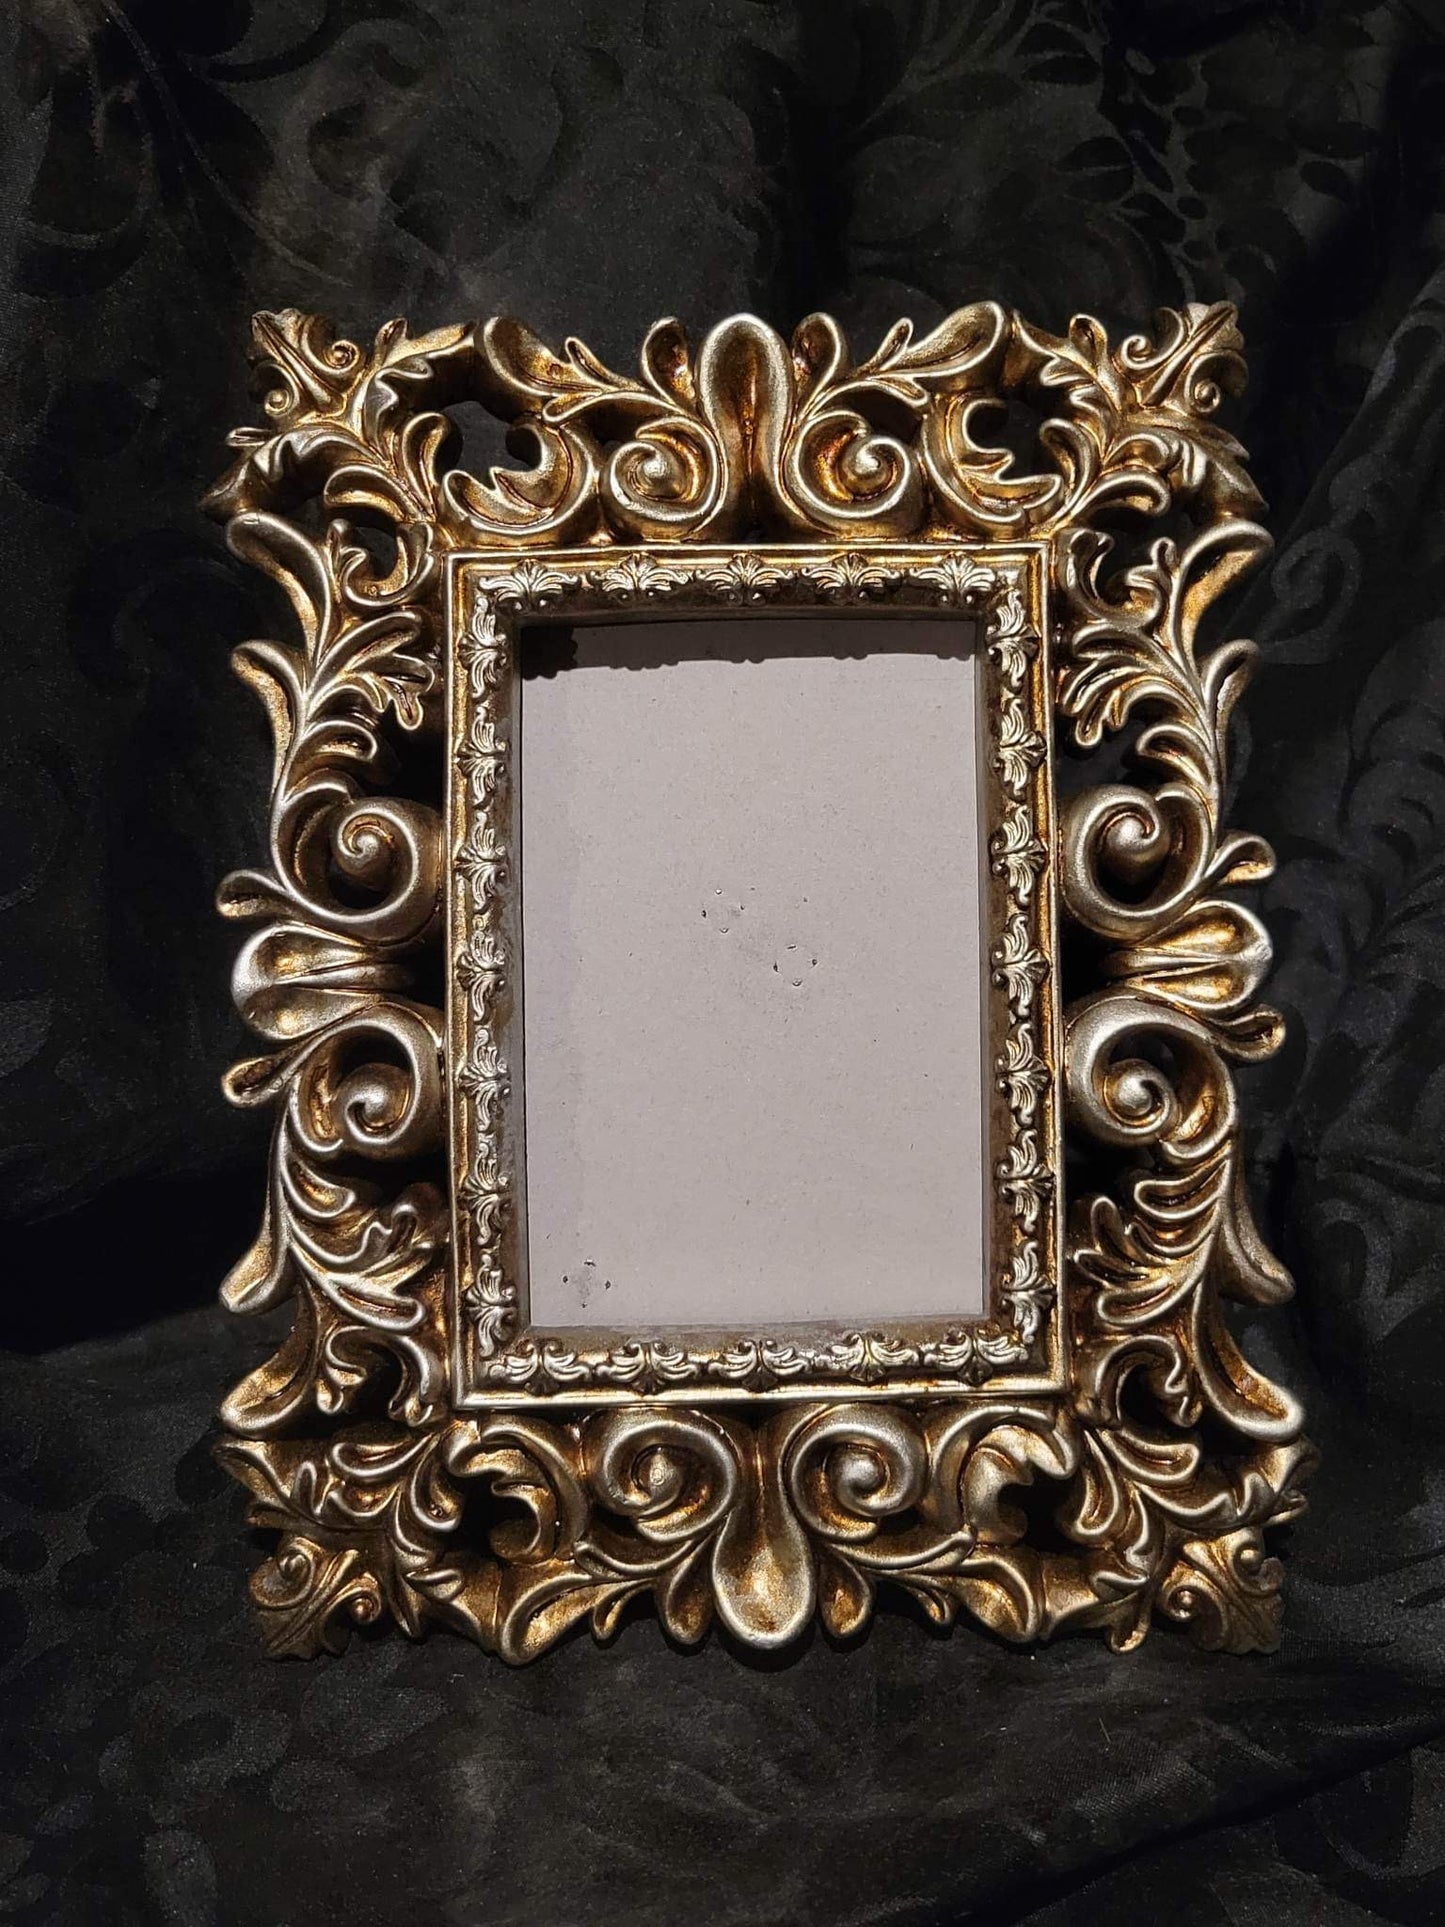 Thick Victorian style frame